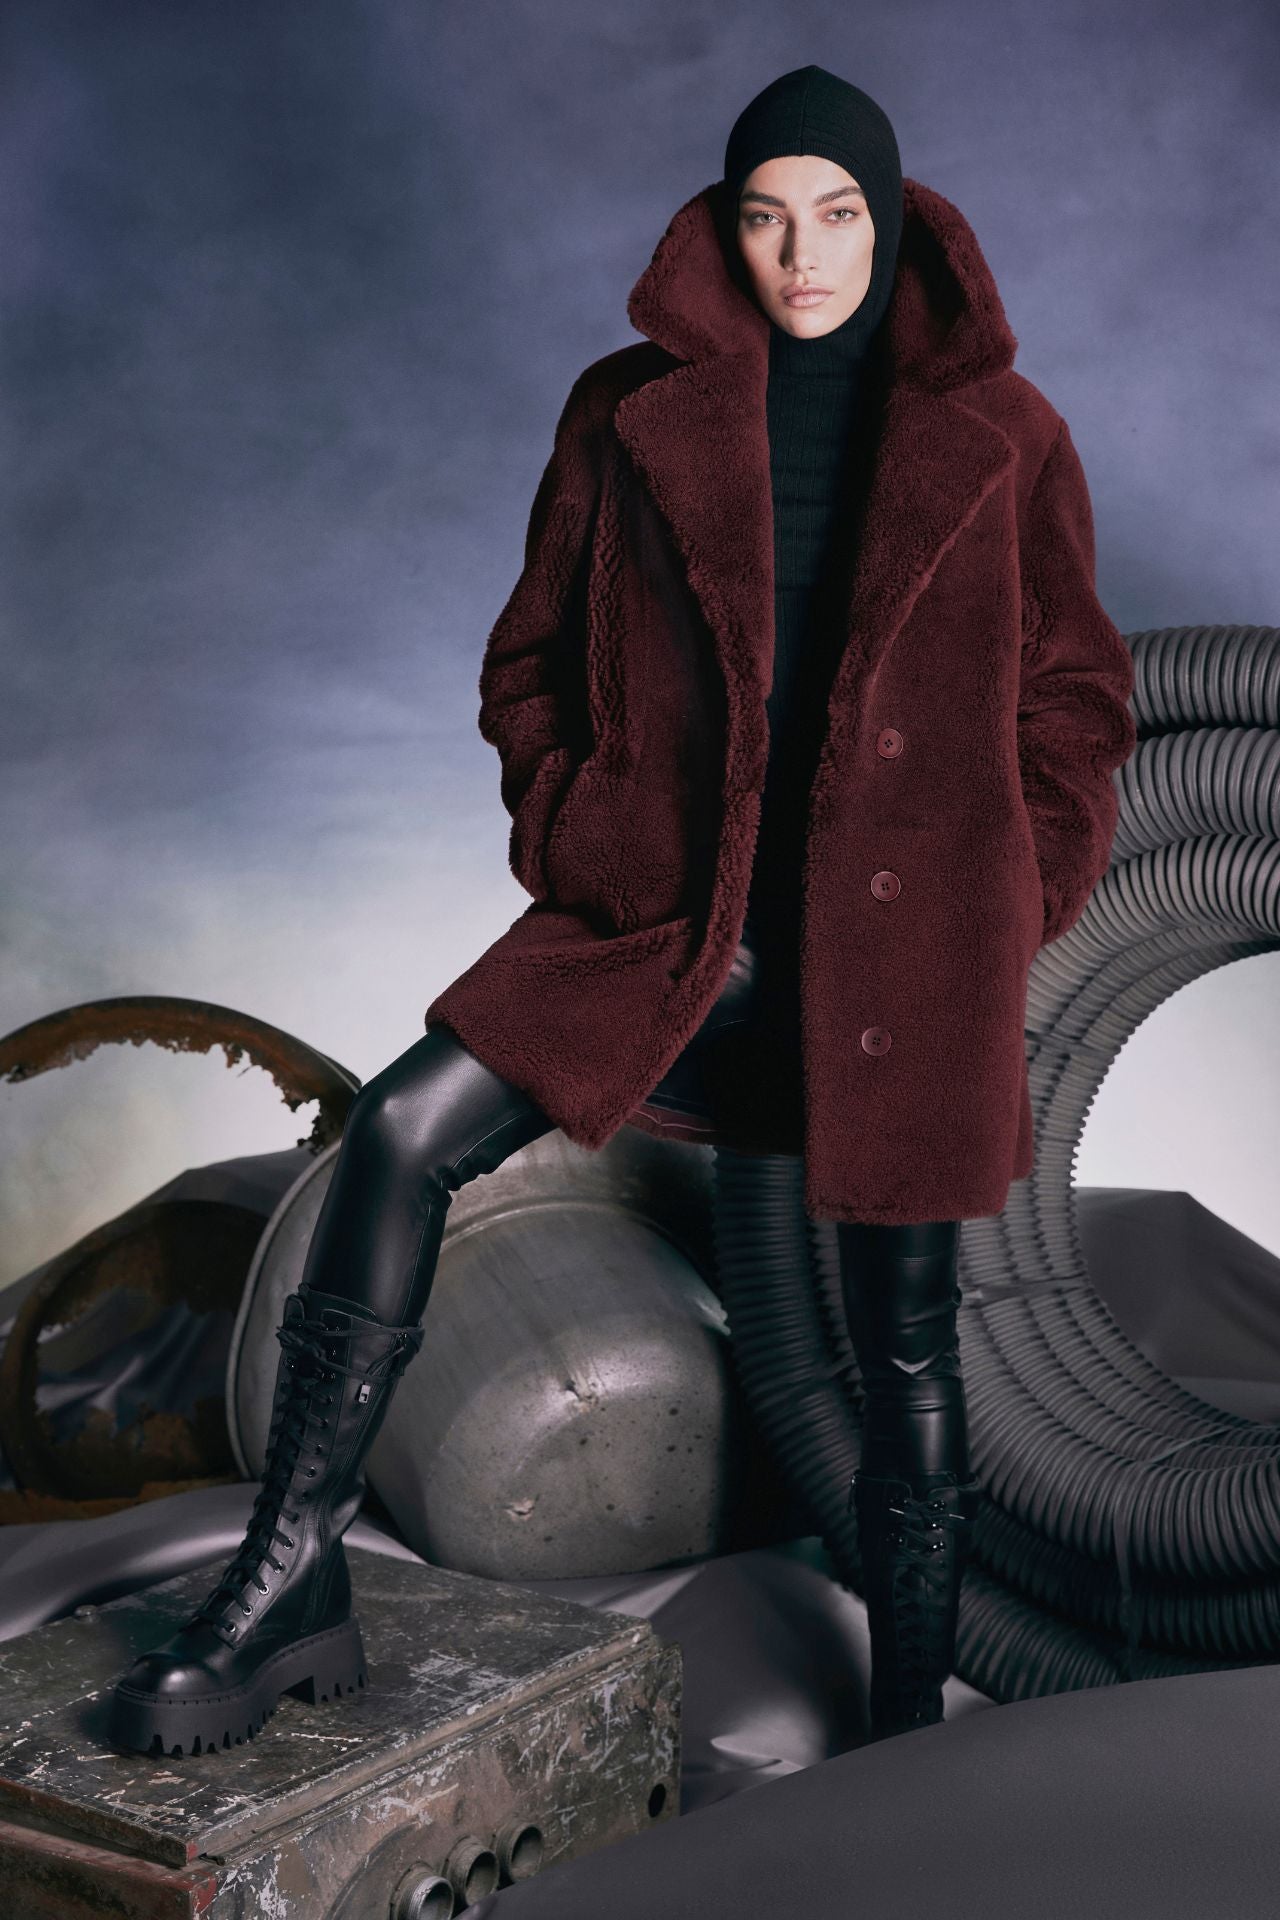 Our Tempo Burgundy Suede Curly Notched Collar Coat is a luxurious outerwear piece that combines fashion and warmth. Crafted from Spanish shearling, this coat offers unmatched comfort and elegance. Whether you’re running errands or attending a formal event, it provides head-to-toe protection against the cold while keeping you stylishly on-trend. Explore our range today to find the perfect coat to elevate your winter wardrobe! 🧥❄️